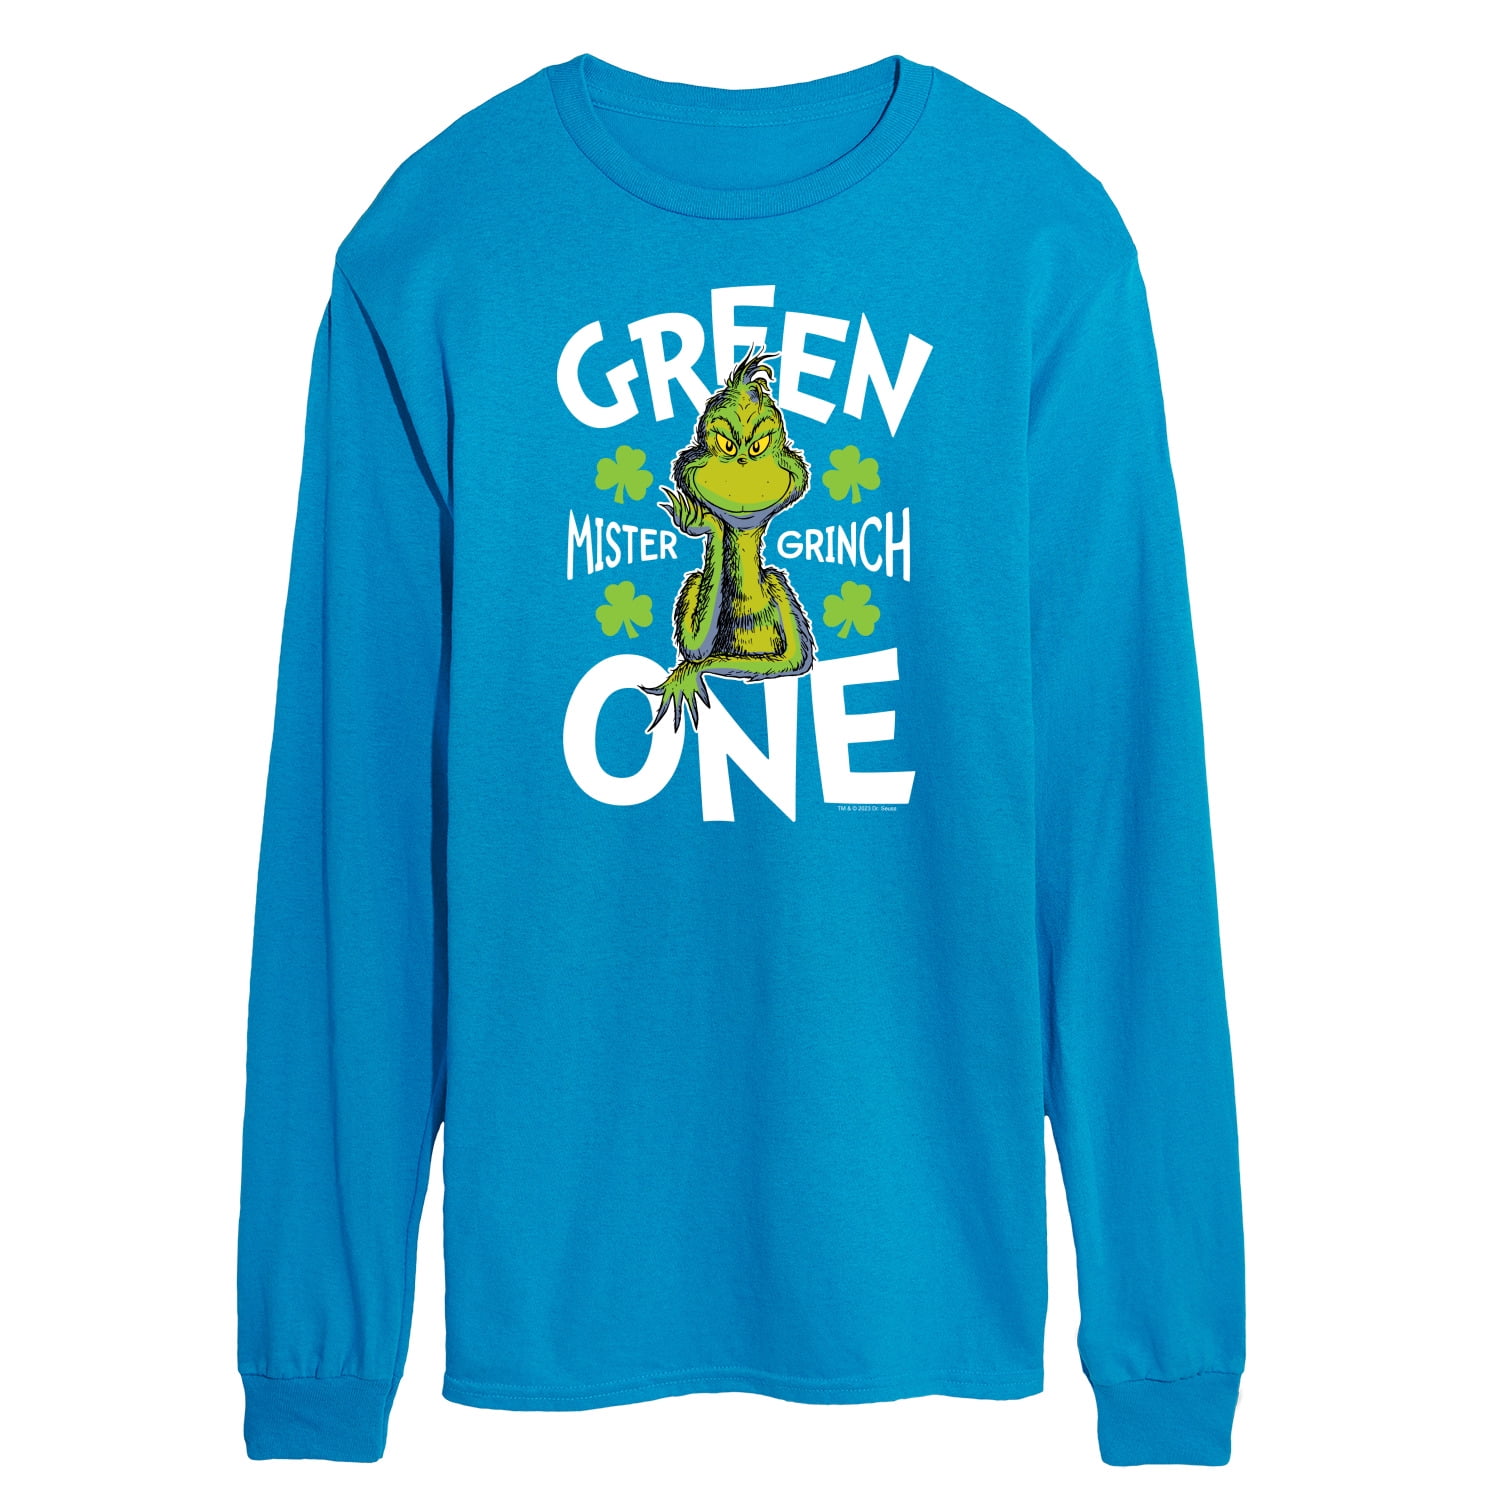 The Grinch - Green One - Men\'s Long Sleeve T-Shirt